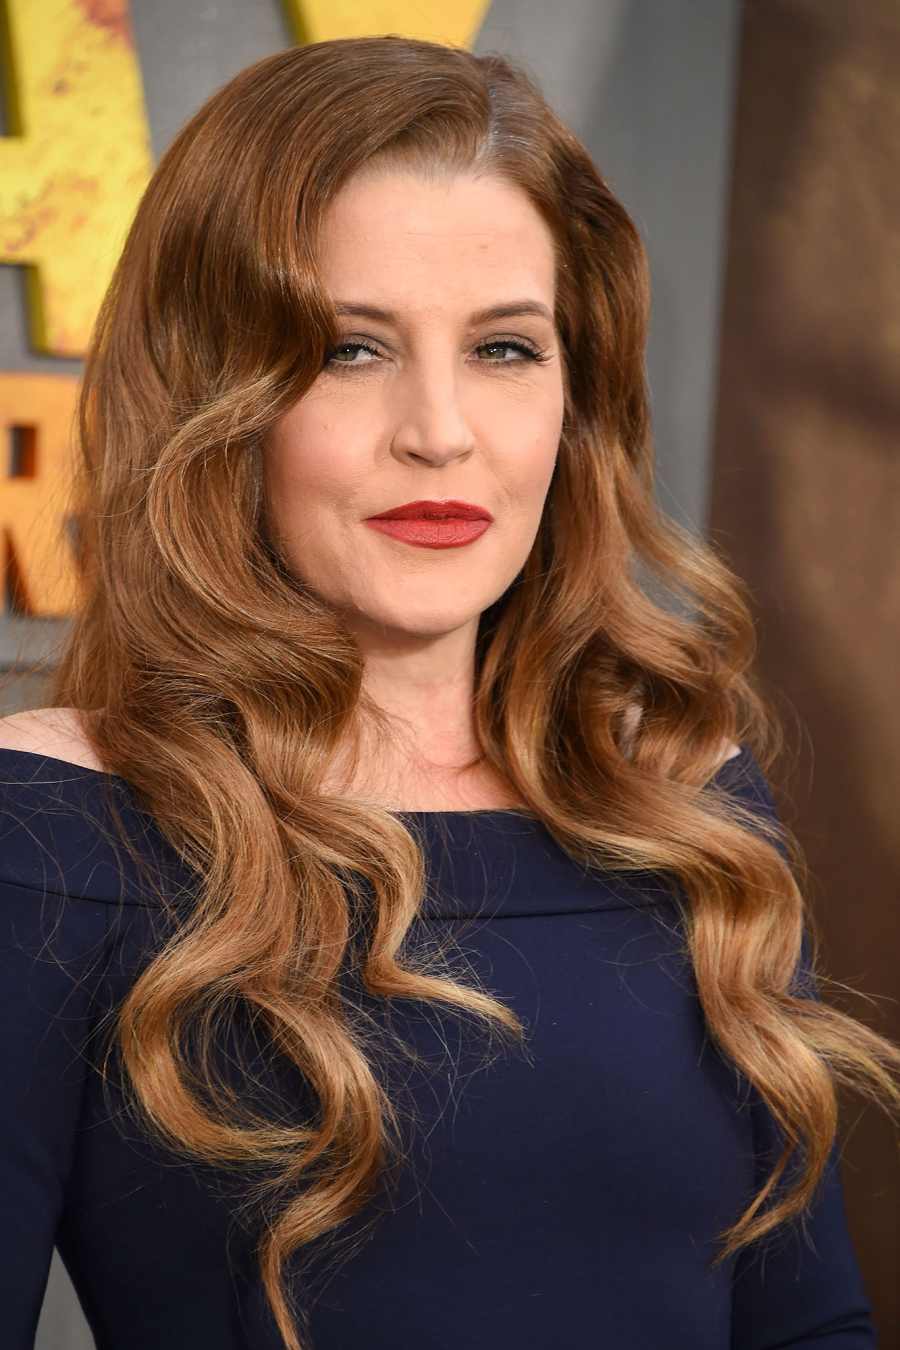 August 2022 Lisa Marie Presley Presley Family Most Heartbreaking Quotes About Late Benjamin Keough